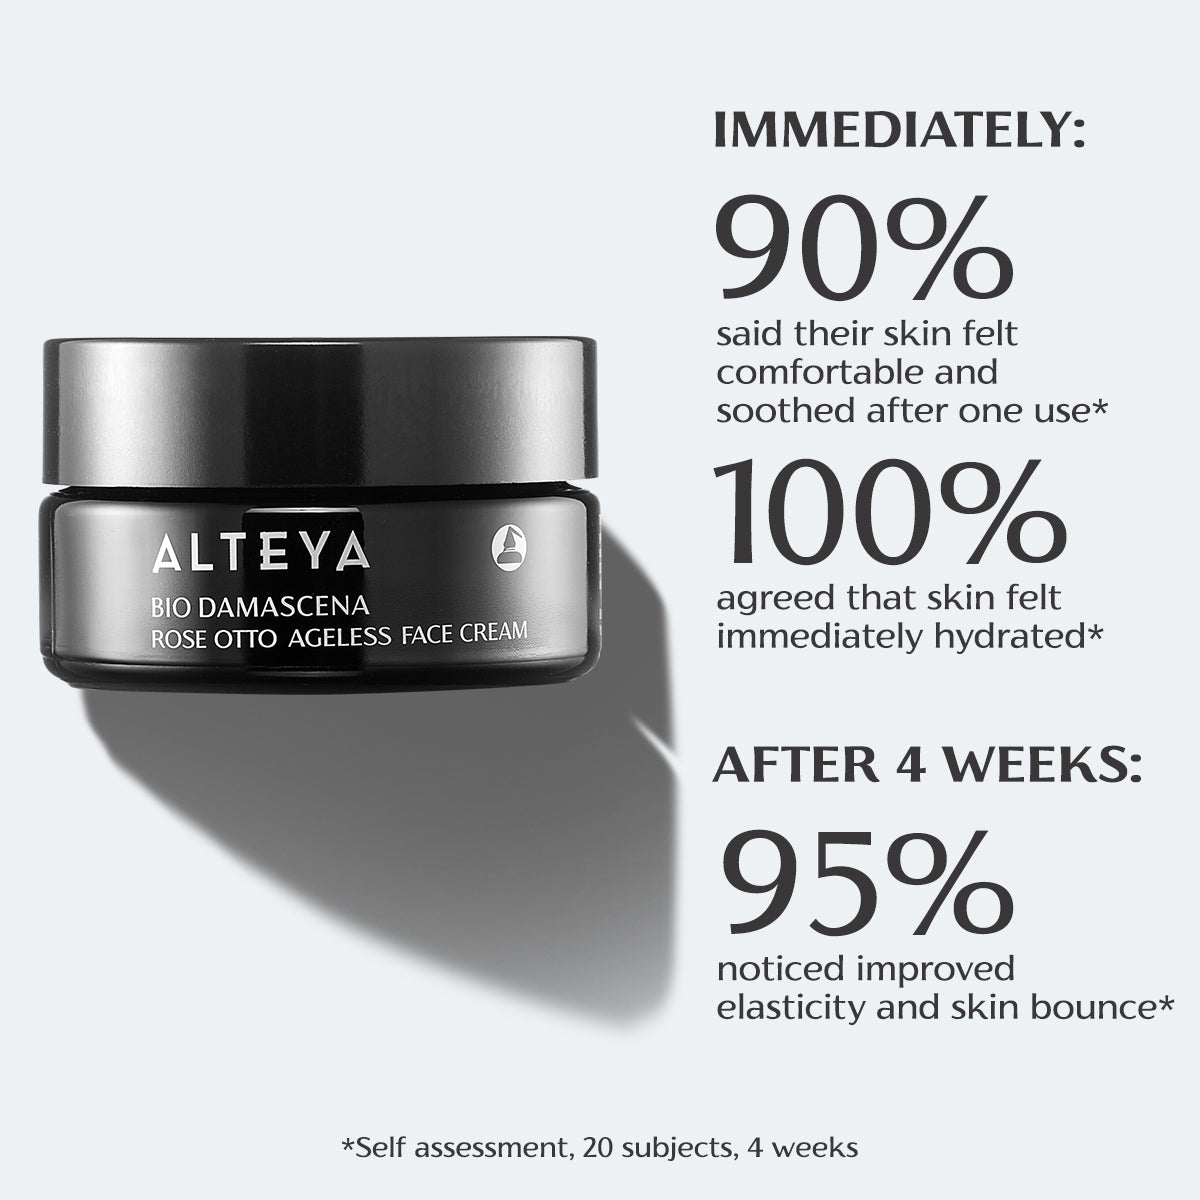 A jar of Alteya Organics' Bio Damascena Rose Otto Ageless Face Cream infused with the luxurious white truffle extract and nourishing rose oil.